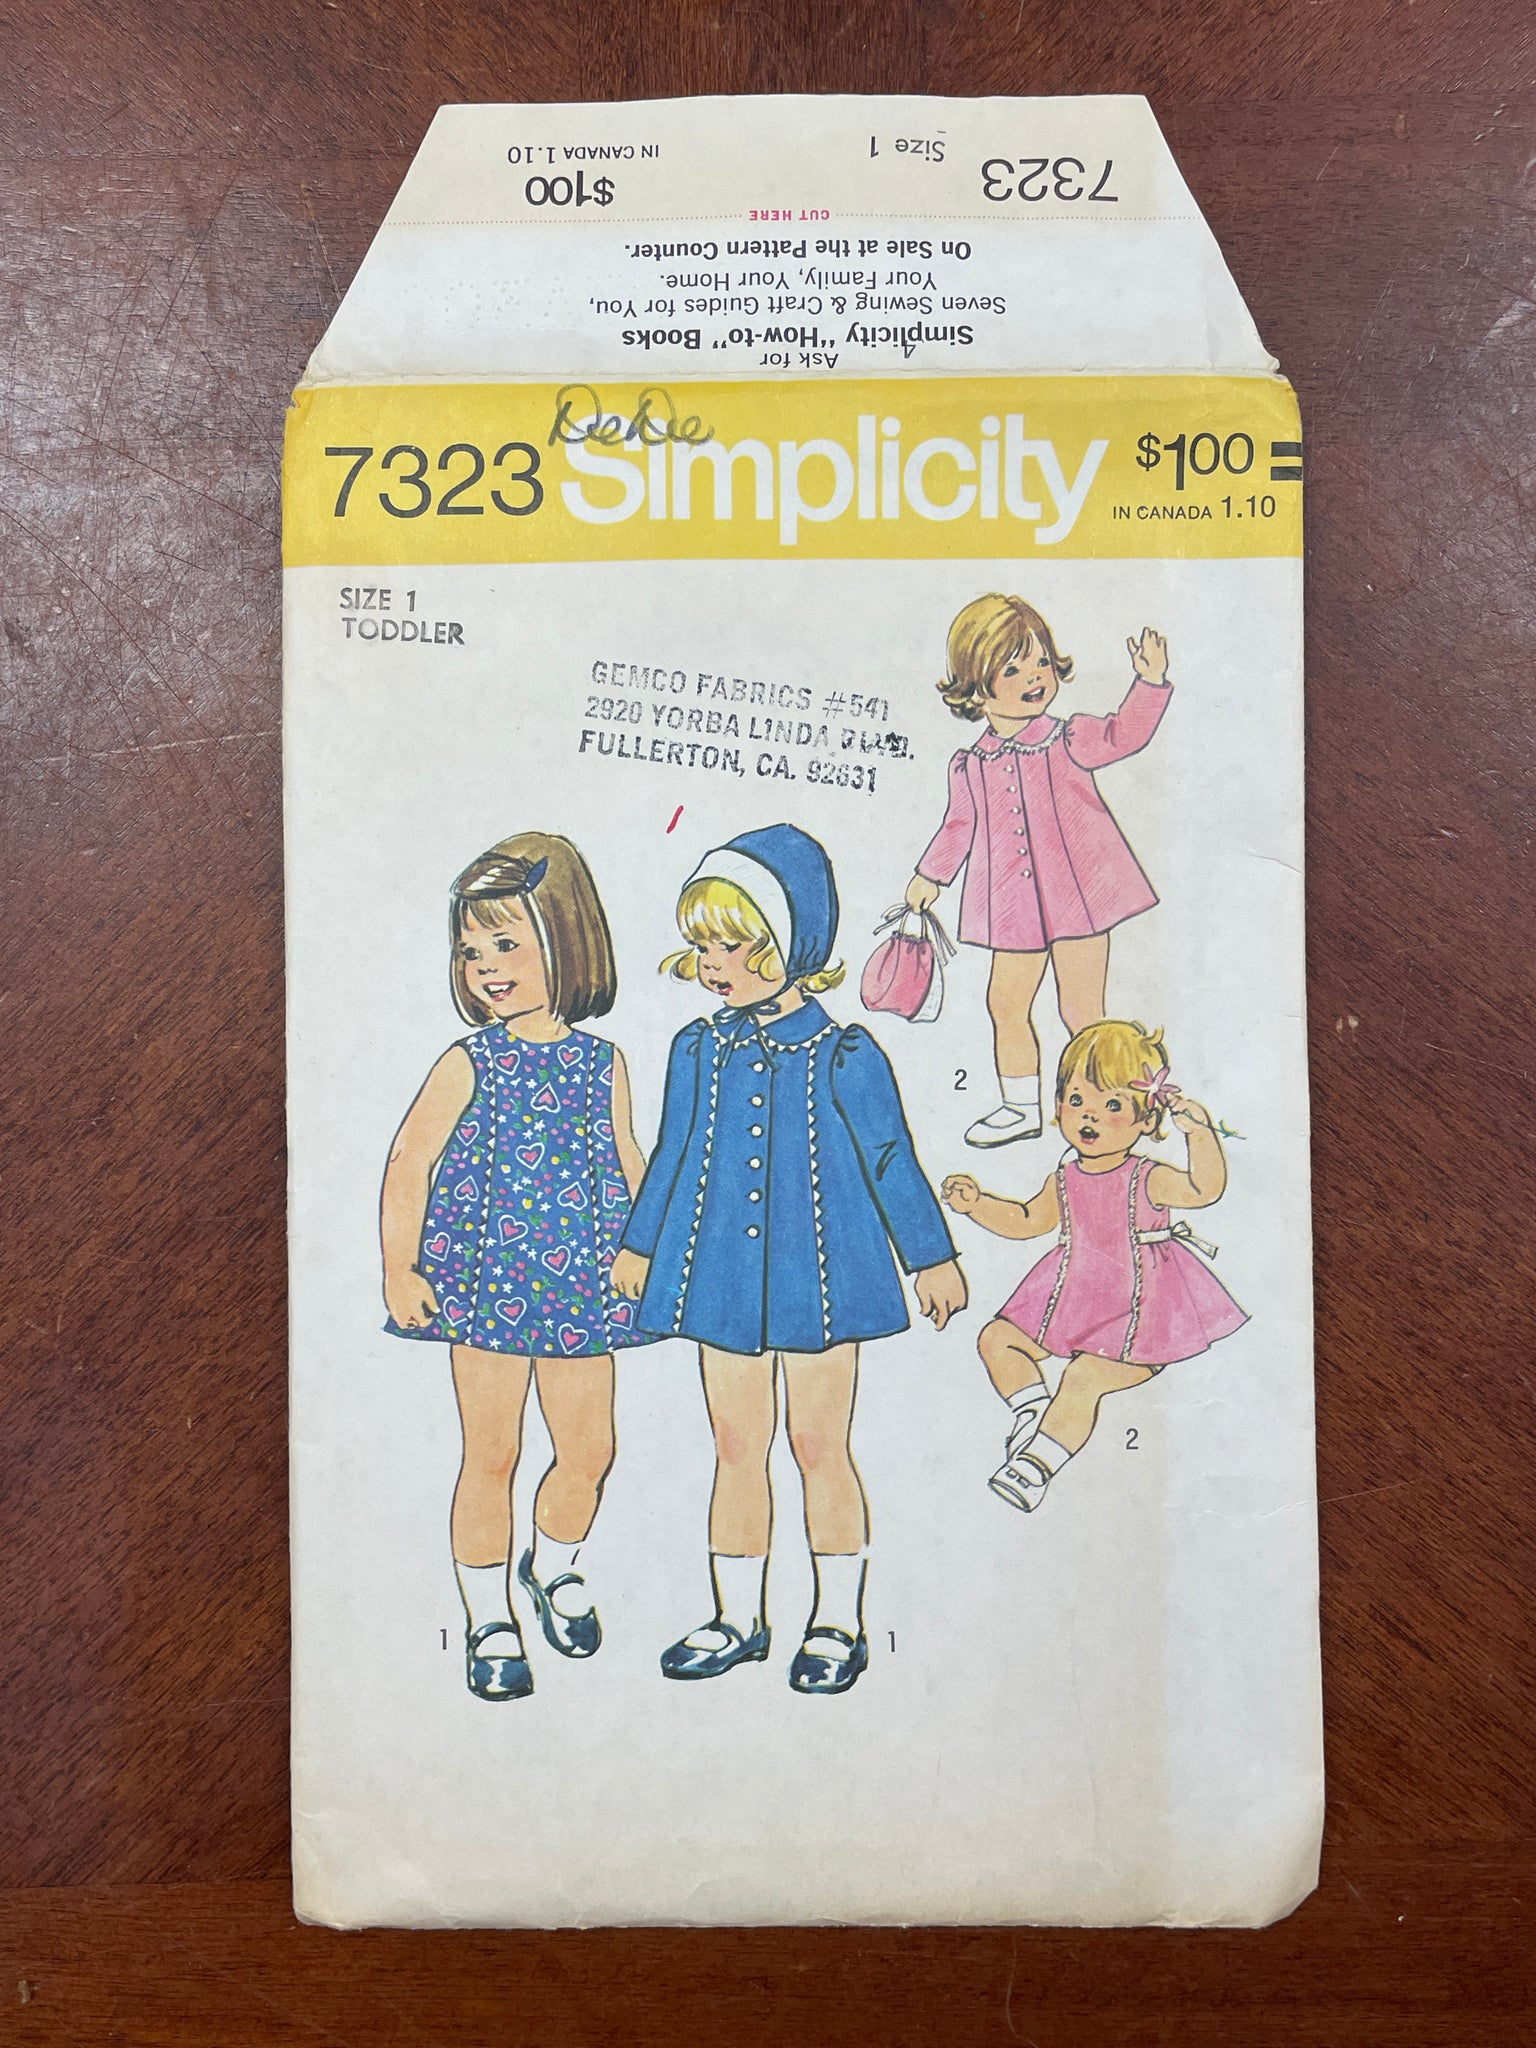 1975 Simplicity 7323 Pattern - Child's Dress, Coat and Hat